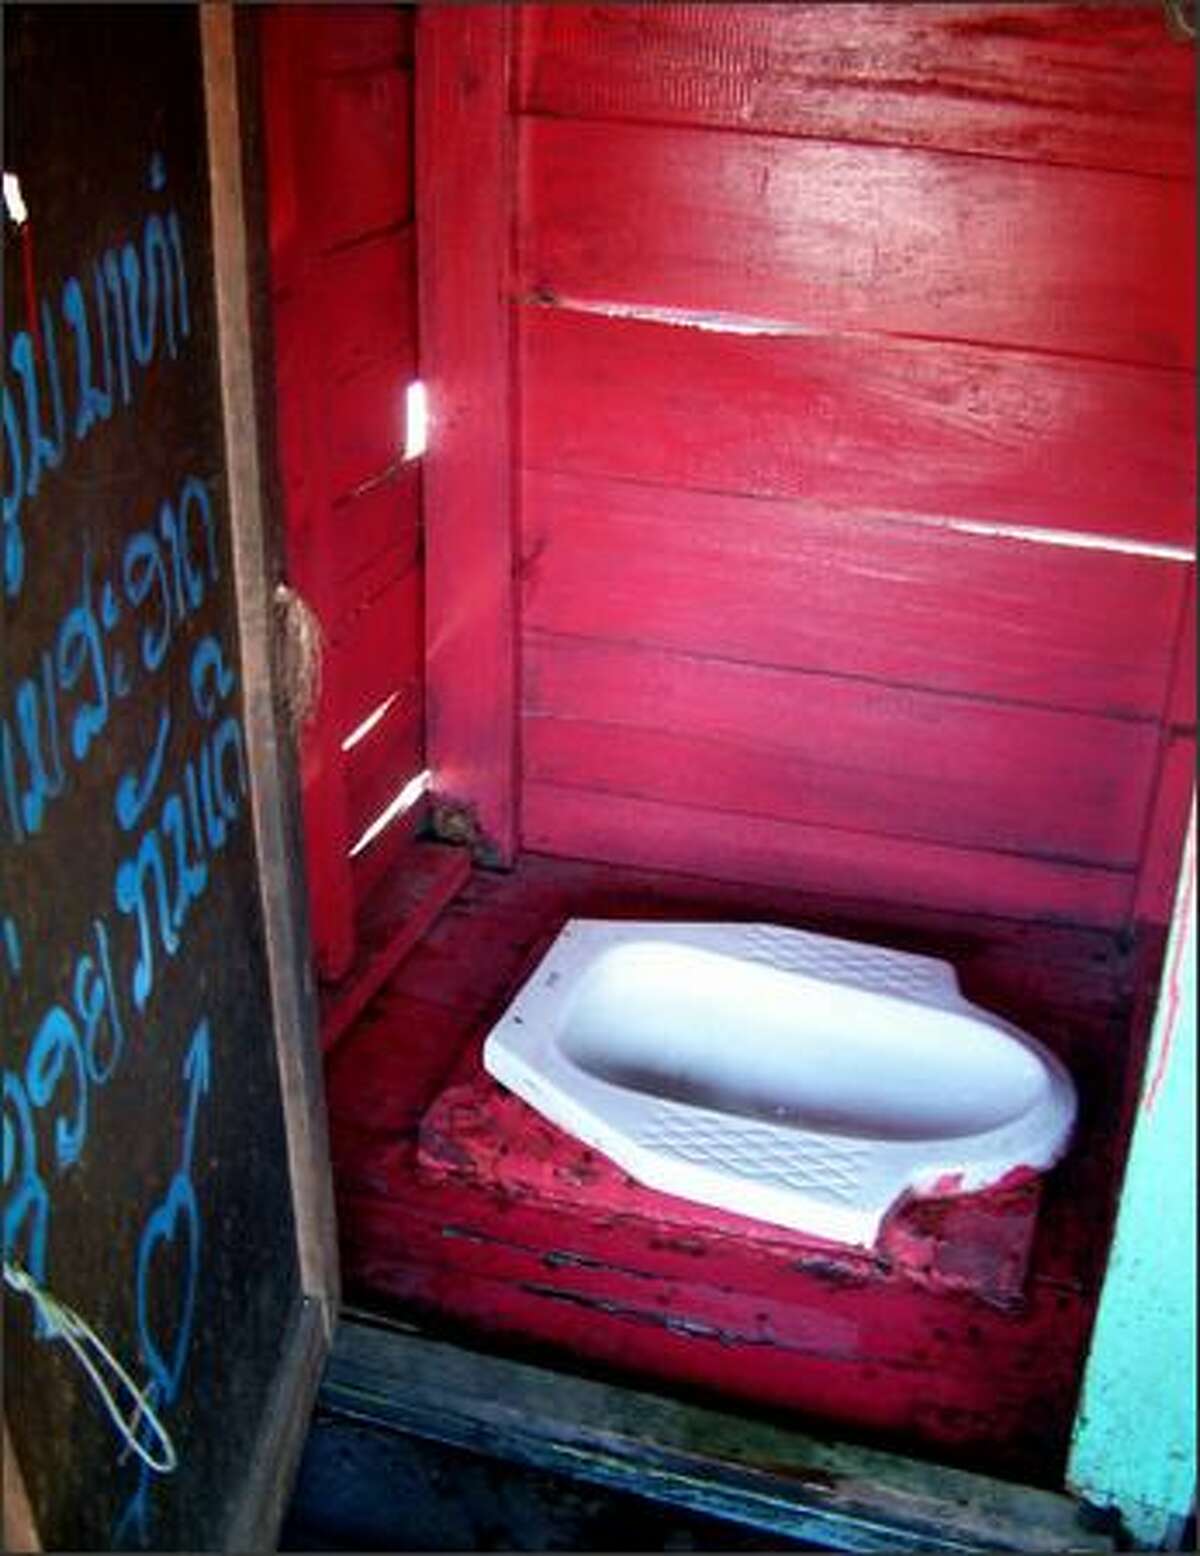 A two-day boat trip down the Mekong River in Laos introduced me to the smallest restroom in the world. A four-foot-tall wooden box on the back of the barge enclosed a bare squat-style toilet.